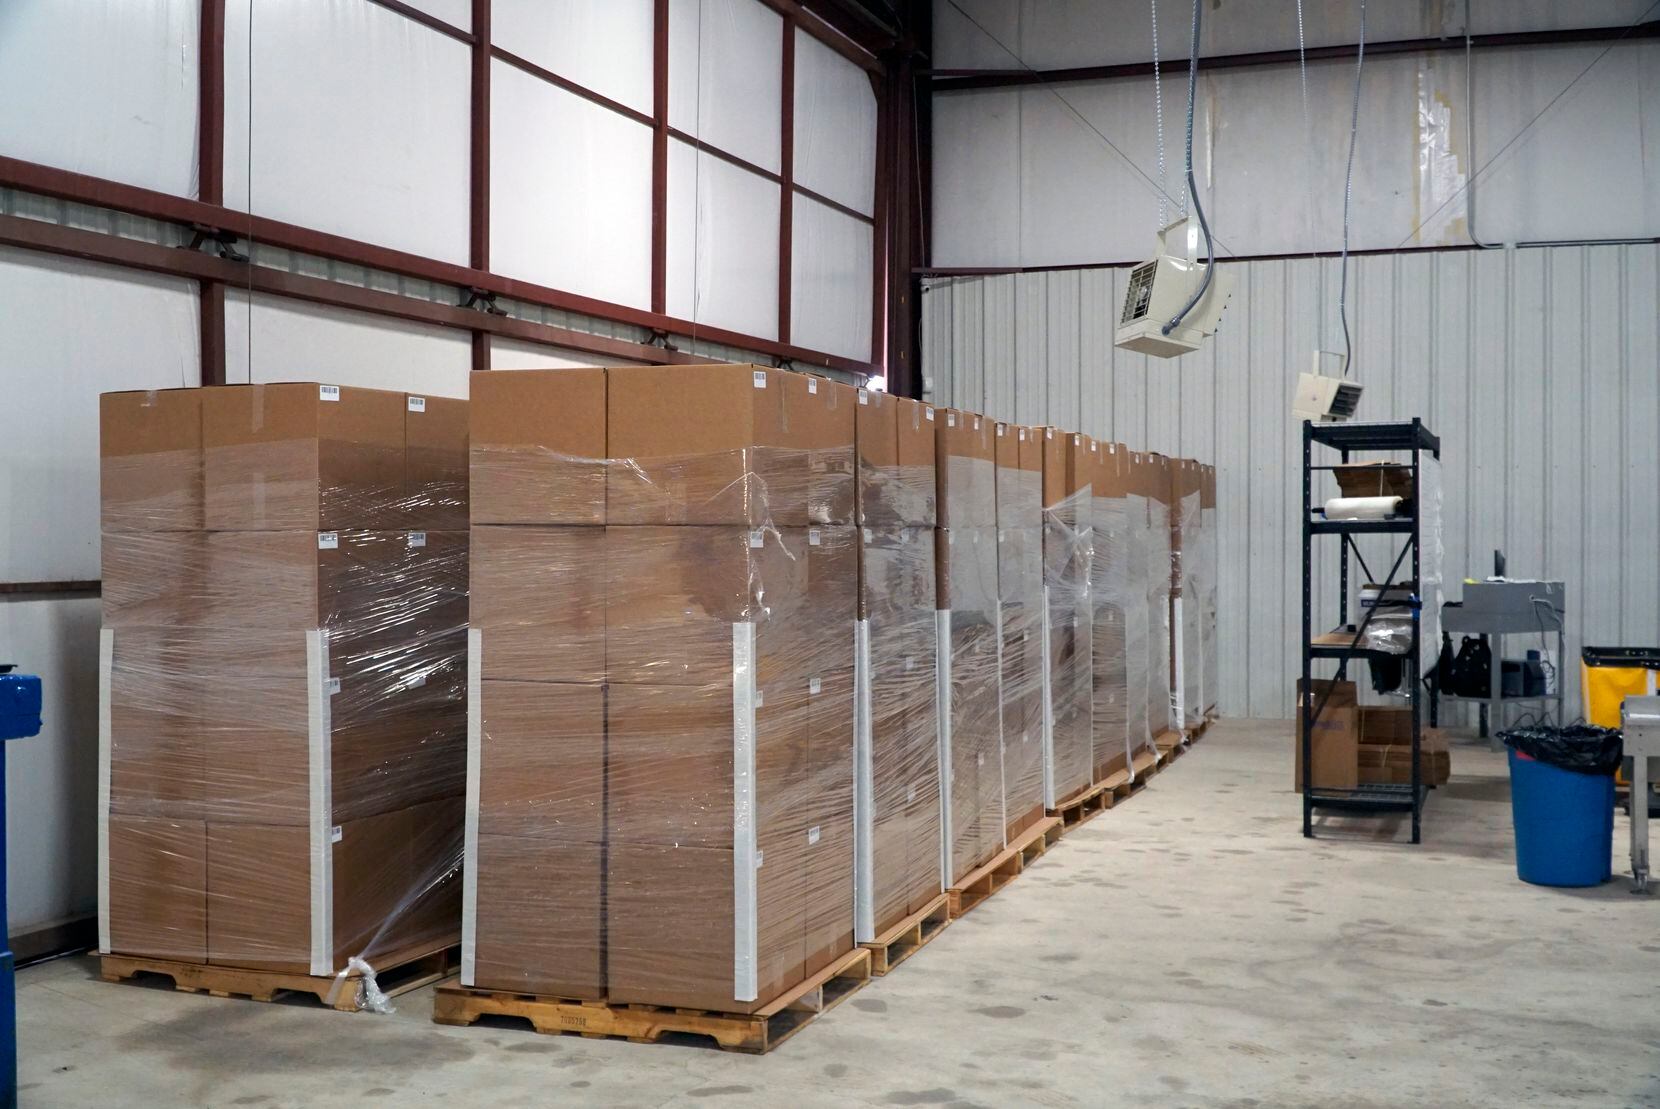 Over 200,000 masks are boxed and ready for shipment at United States Mask Co. in Fort Worth,...